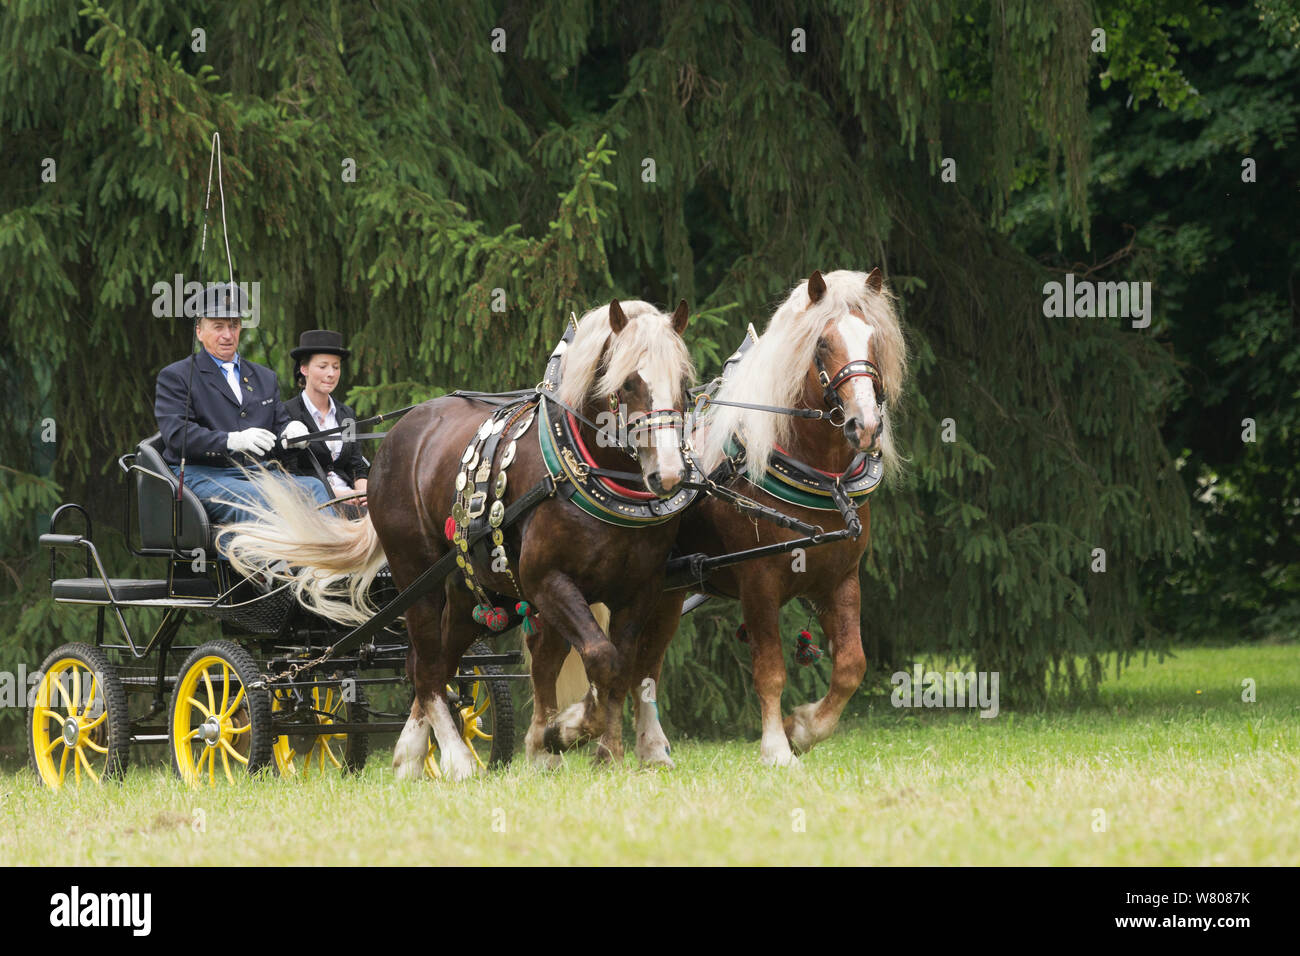 Staff in traditional dress, driving rare Czech Moravian draft horses / stallions, at the Great Riding Festival, in Slatinany national stud, Pardubice Region, Czech Republic. June 2015. Stock Photo